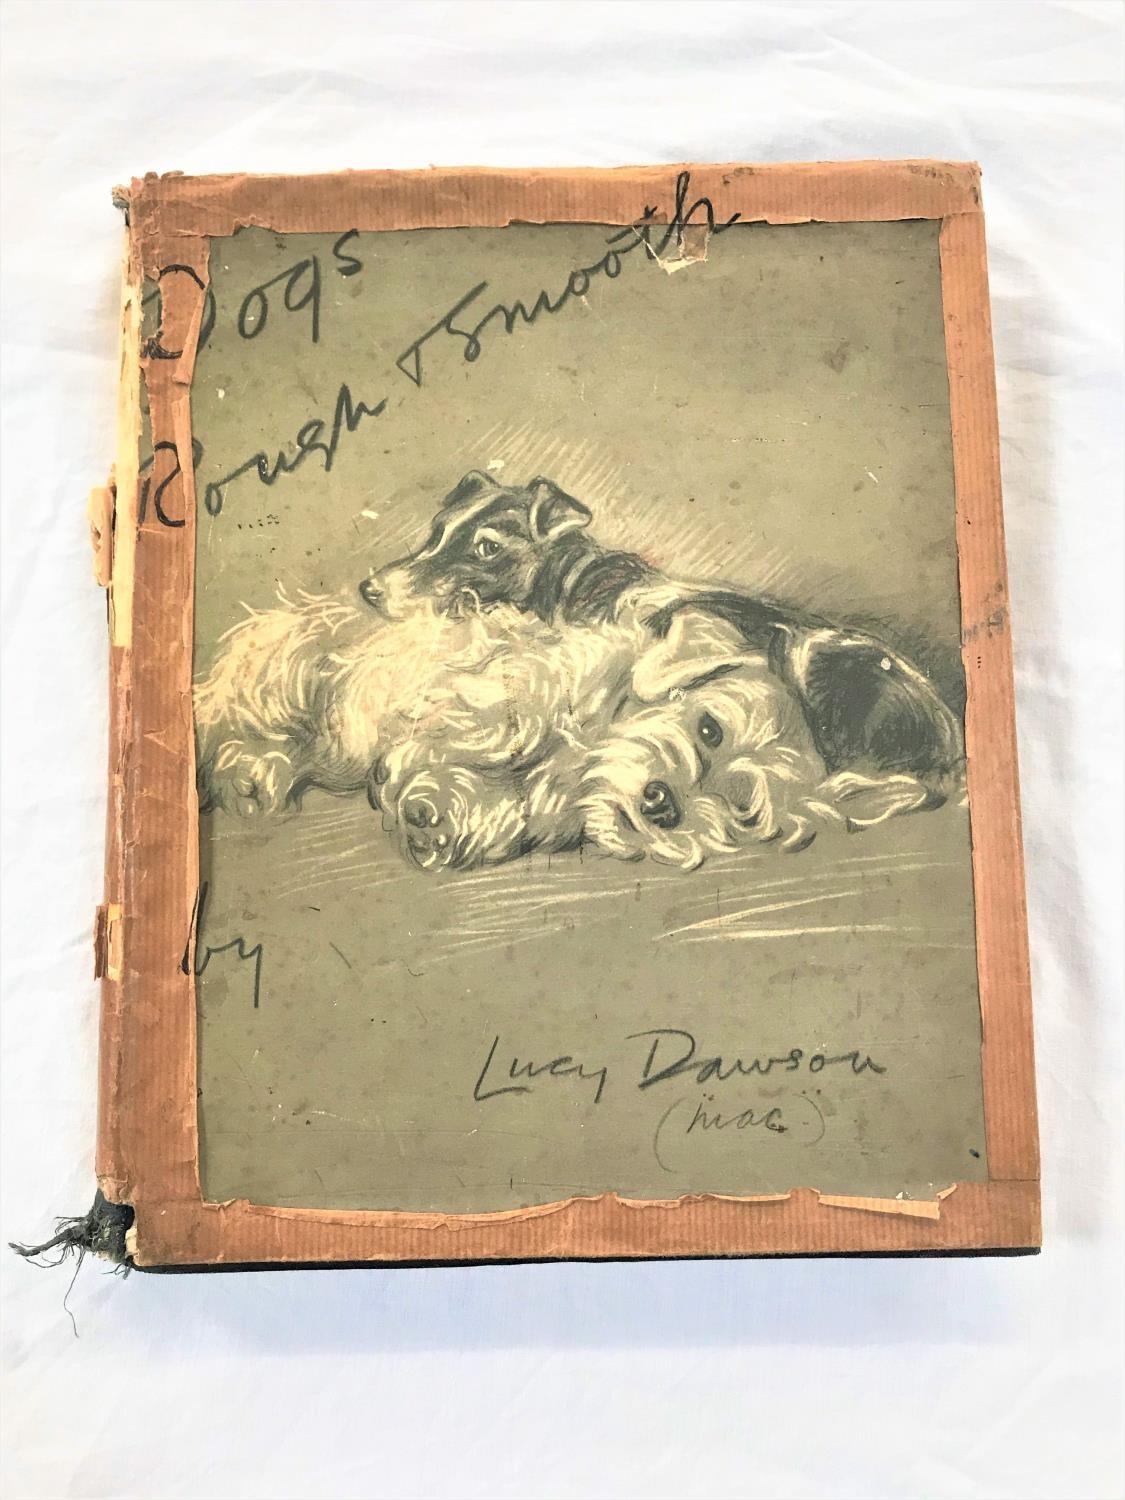 'DOGS ROUGH AND SMOOTH' BY LUCY LAWSON with sixteen Illustrations in colour. First Edition,